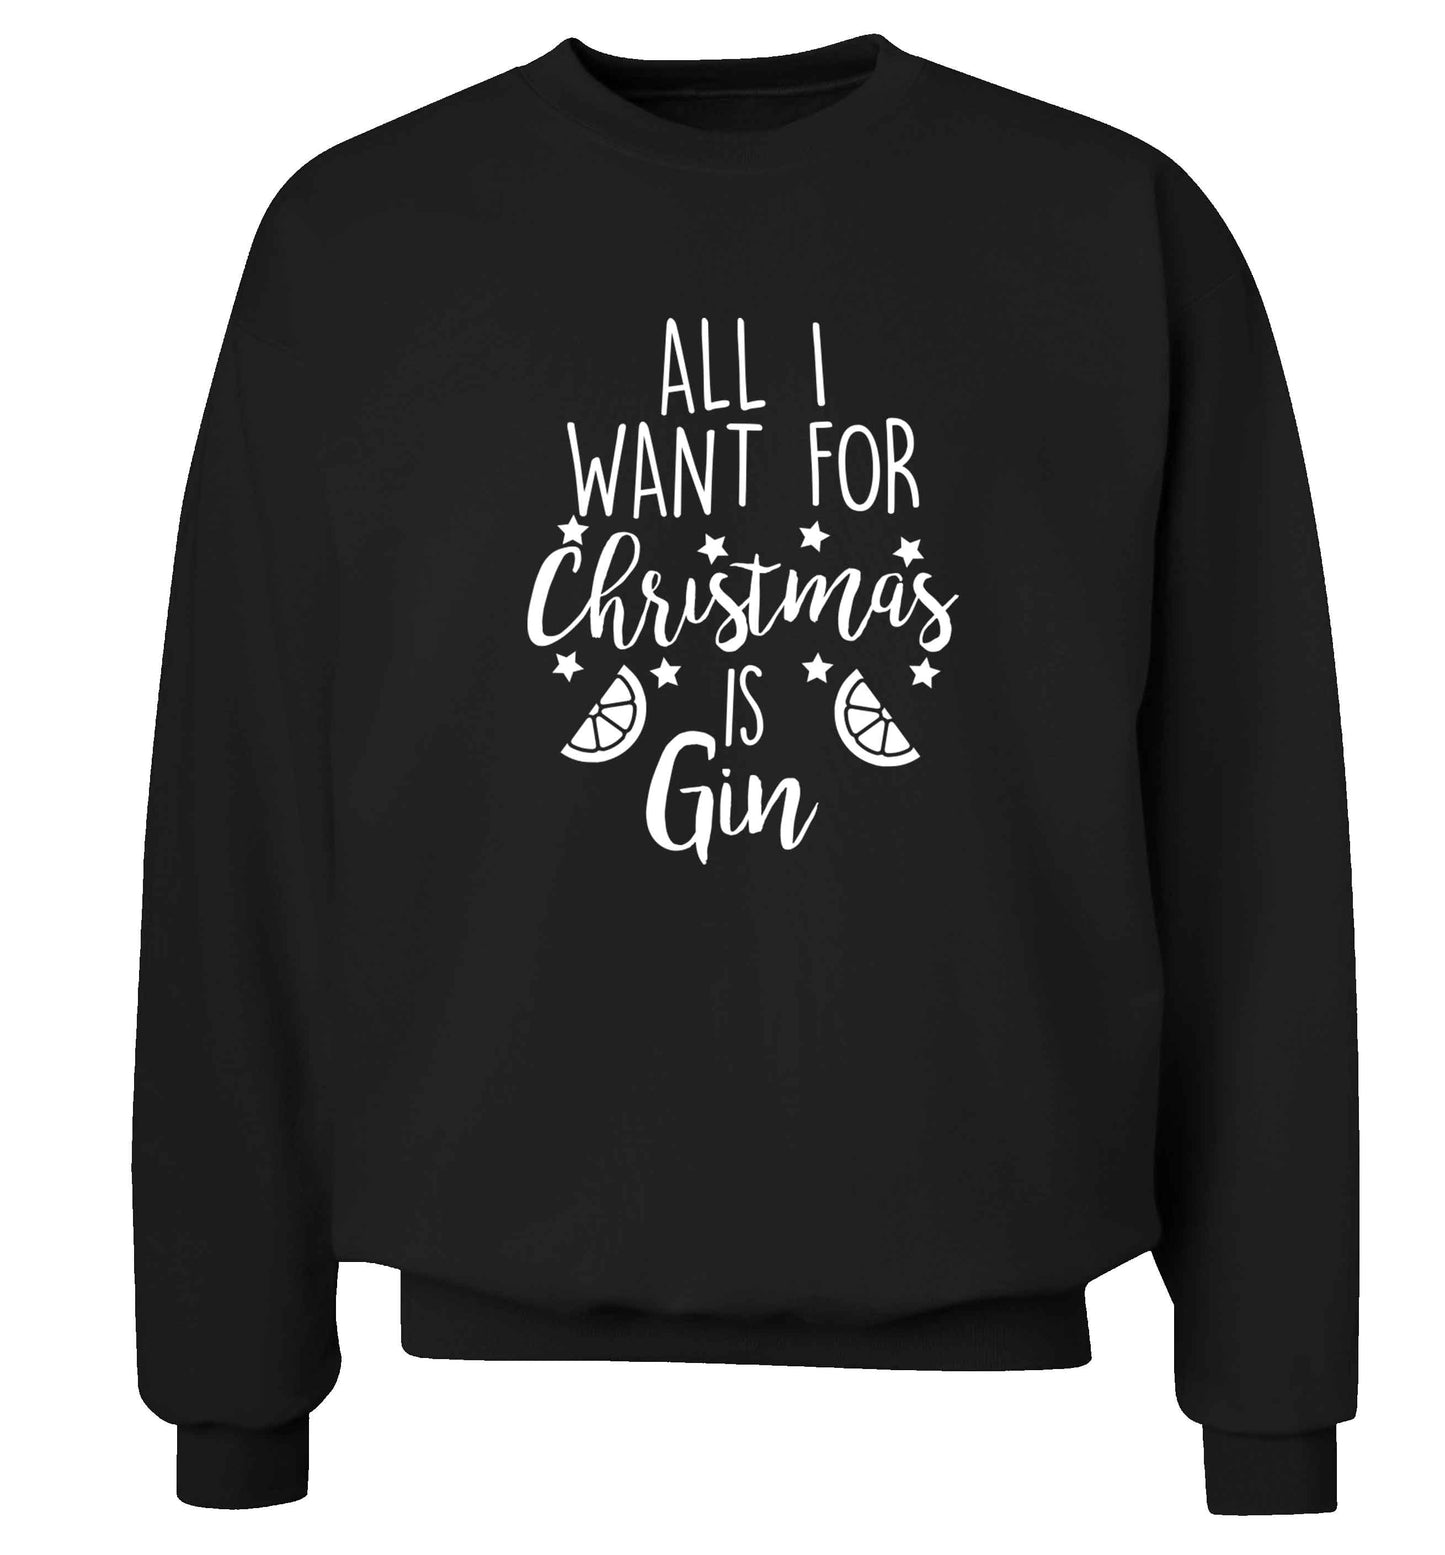 All I want for Christmas is gin Adult's unisex black Sweater 2XL